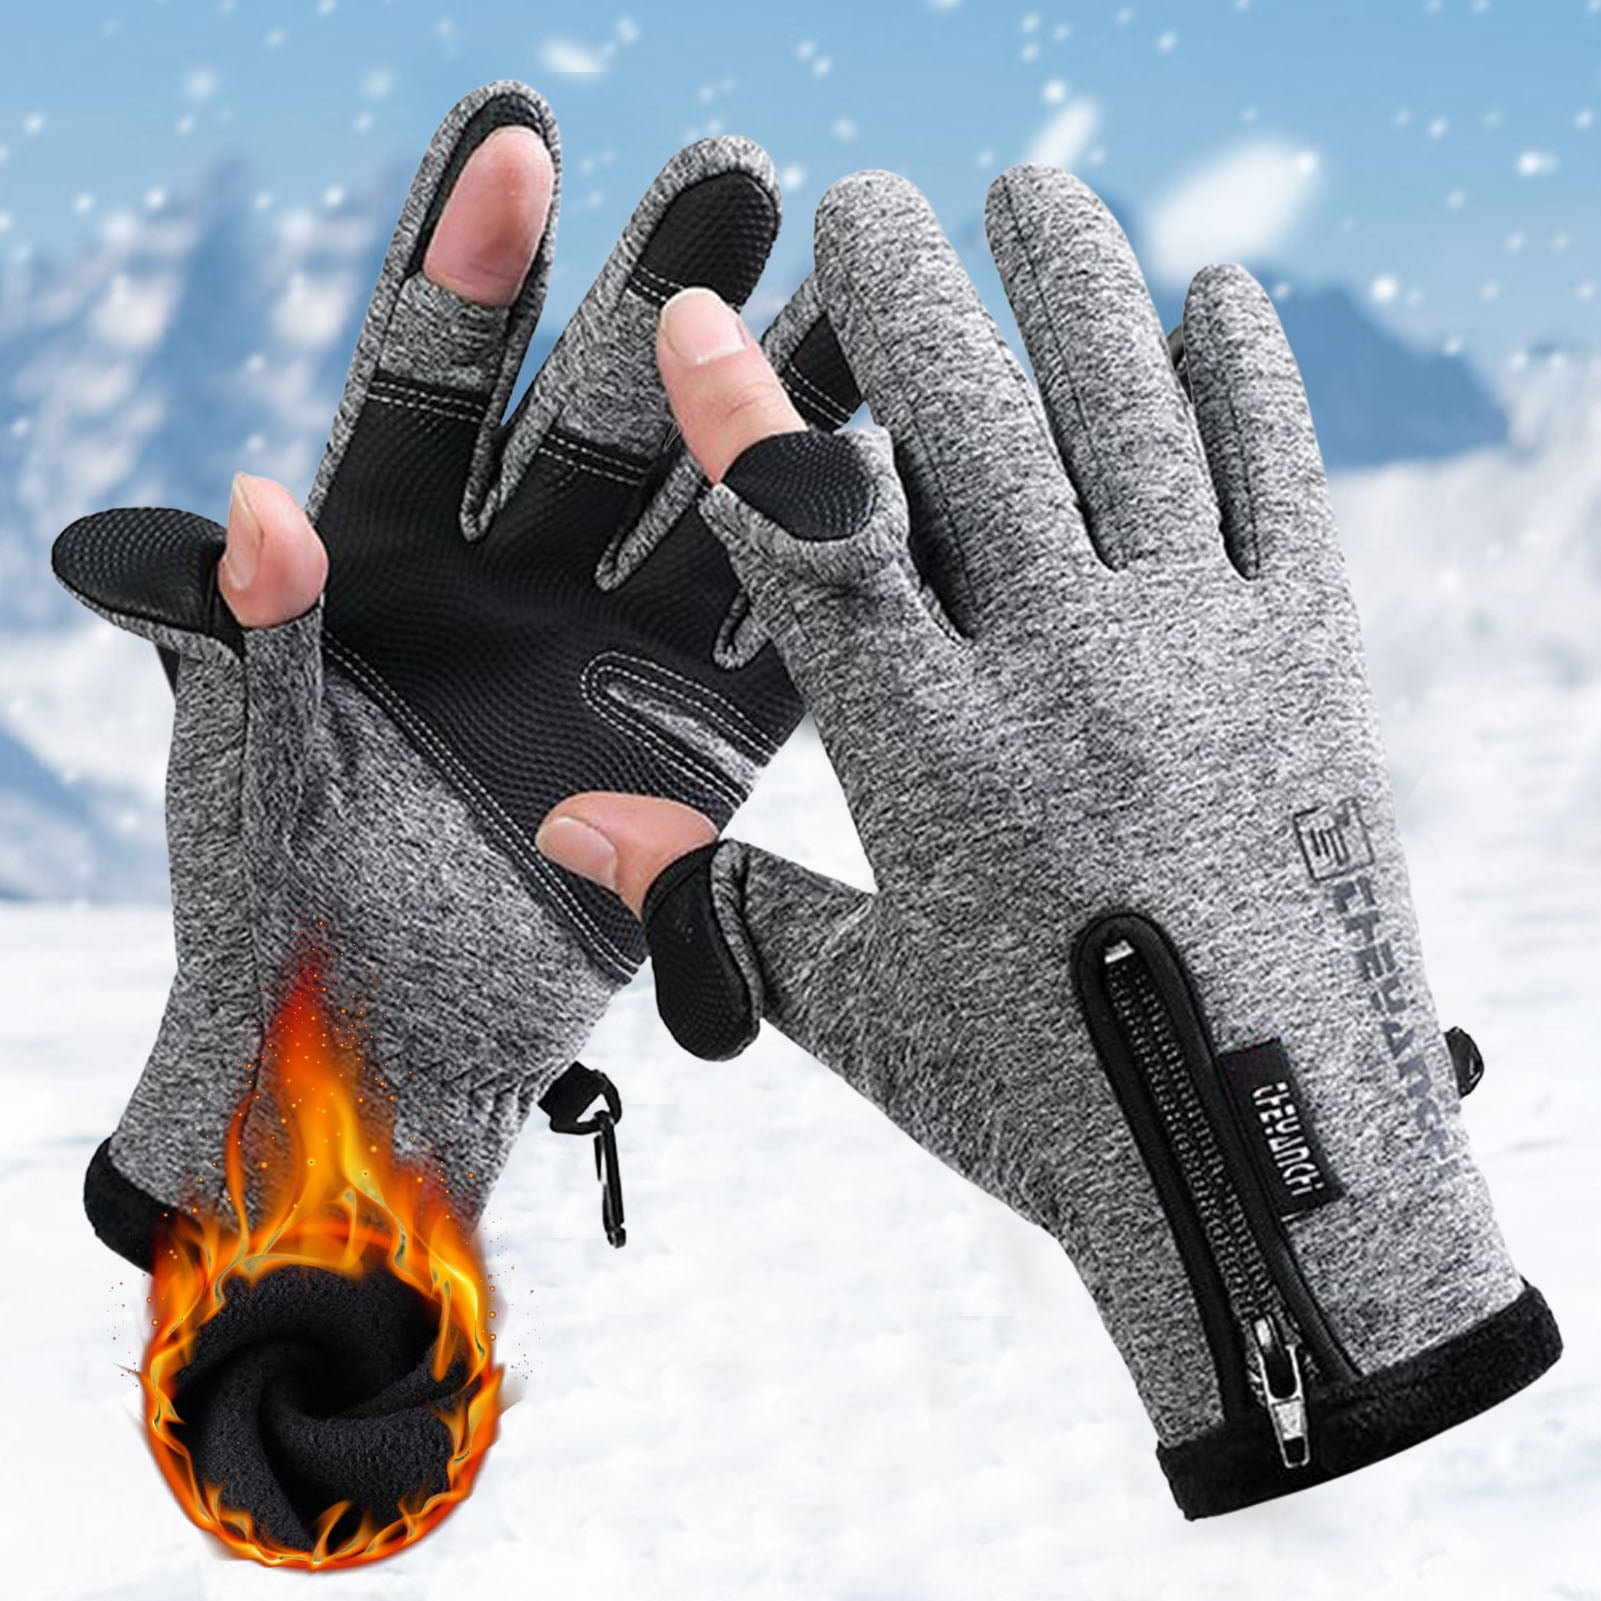 USB Heating Gloves 1 PairTouch Screen Zipper Cuffs Letter Print Fingertip  Opening Winter Adjustable Temperature Fishing Gloves,Black